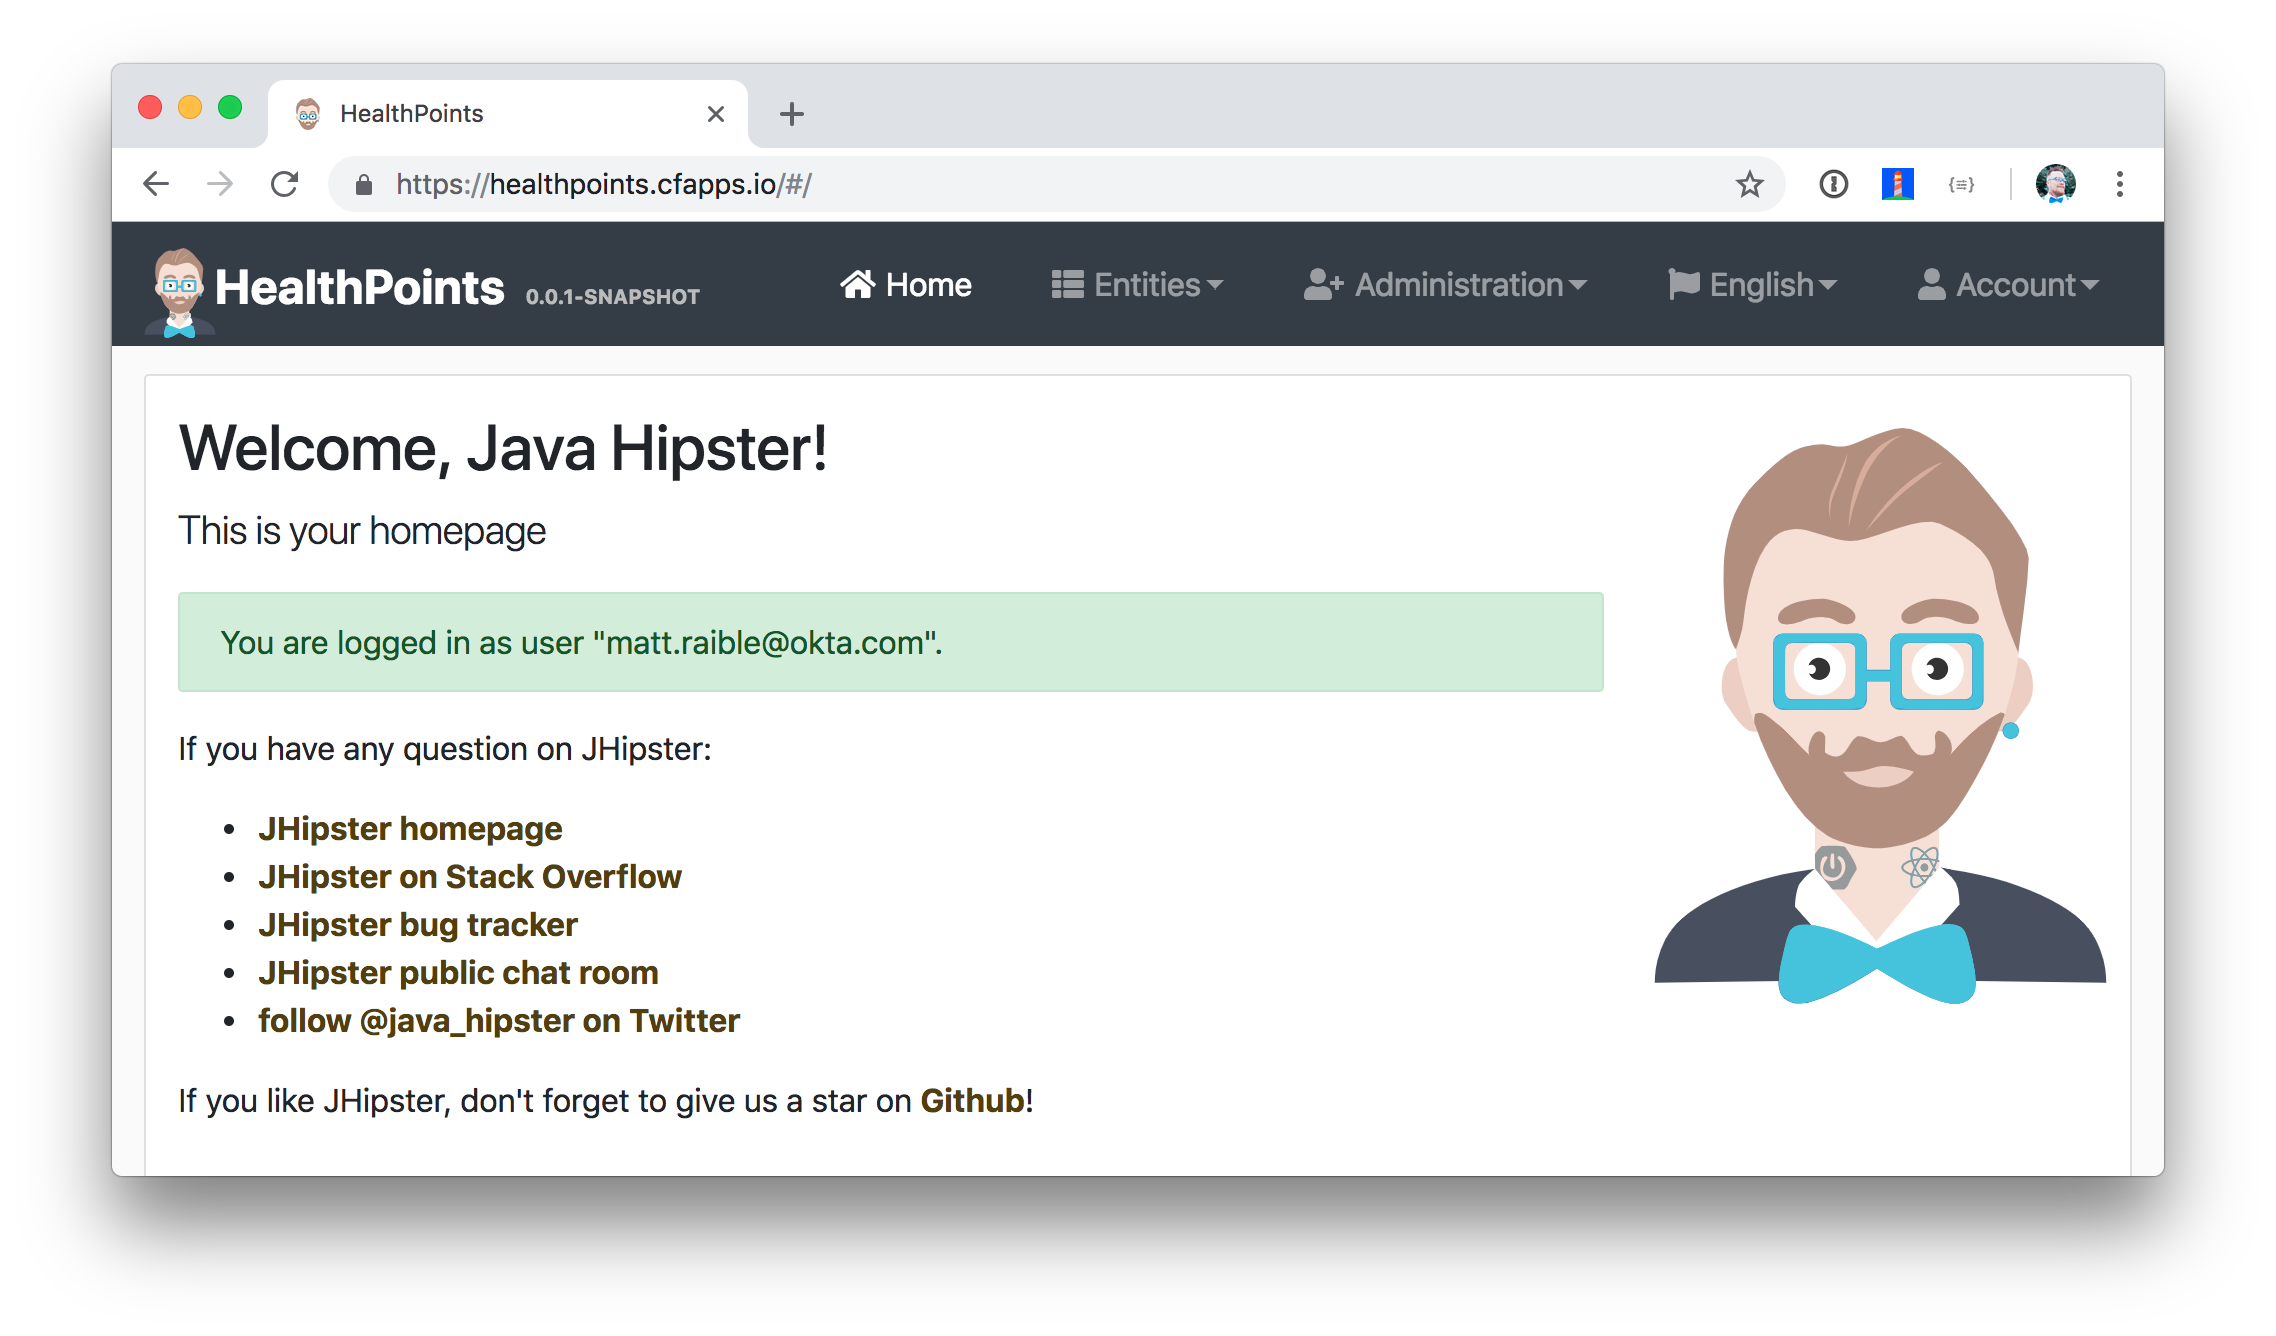 JHipster API on Cloud Foundry